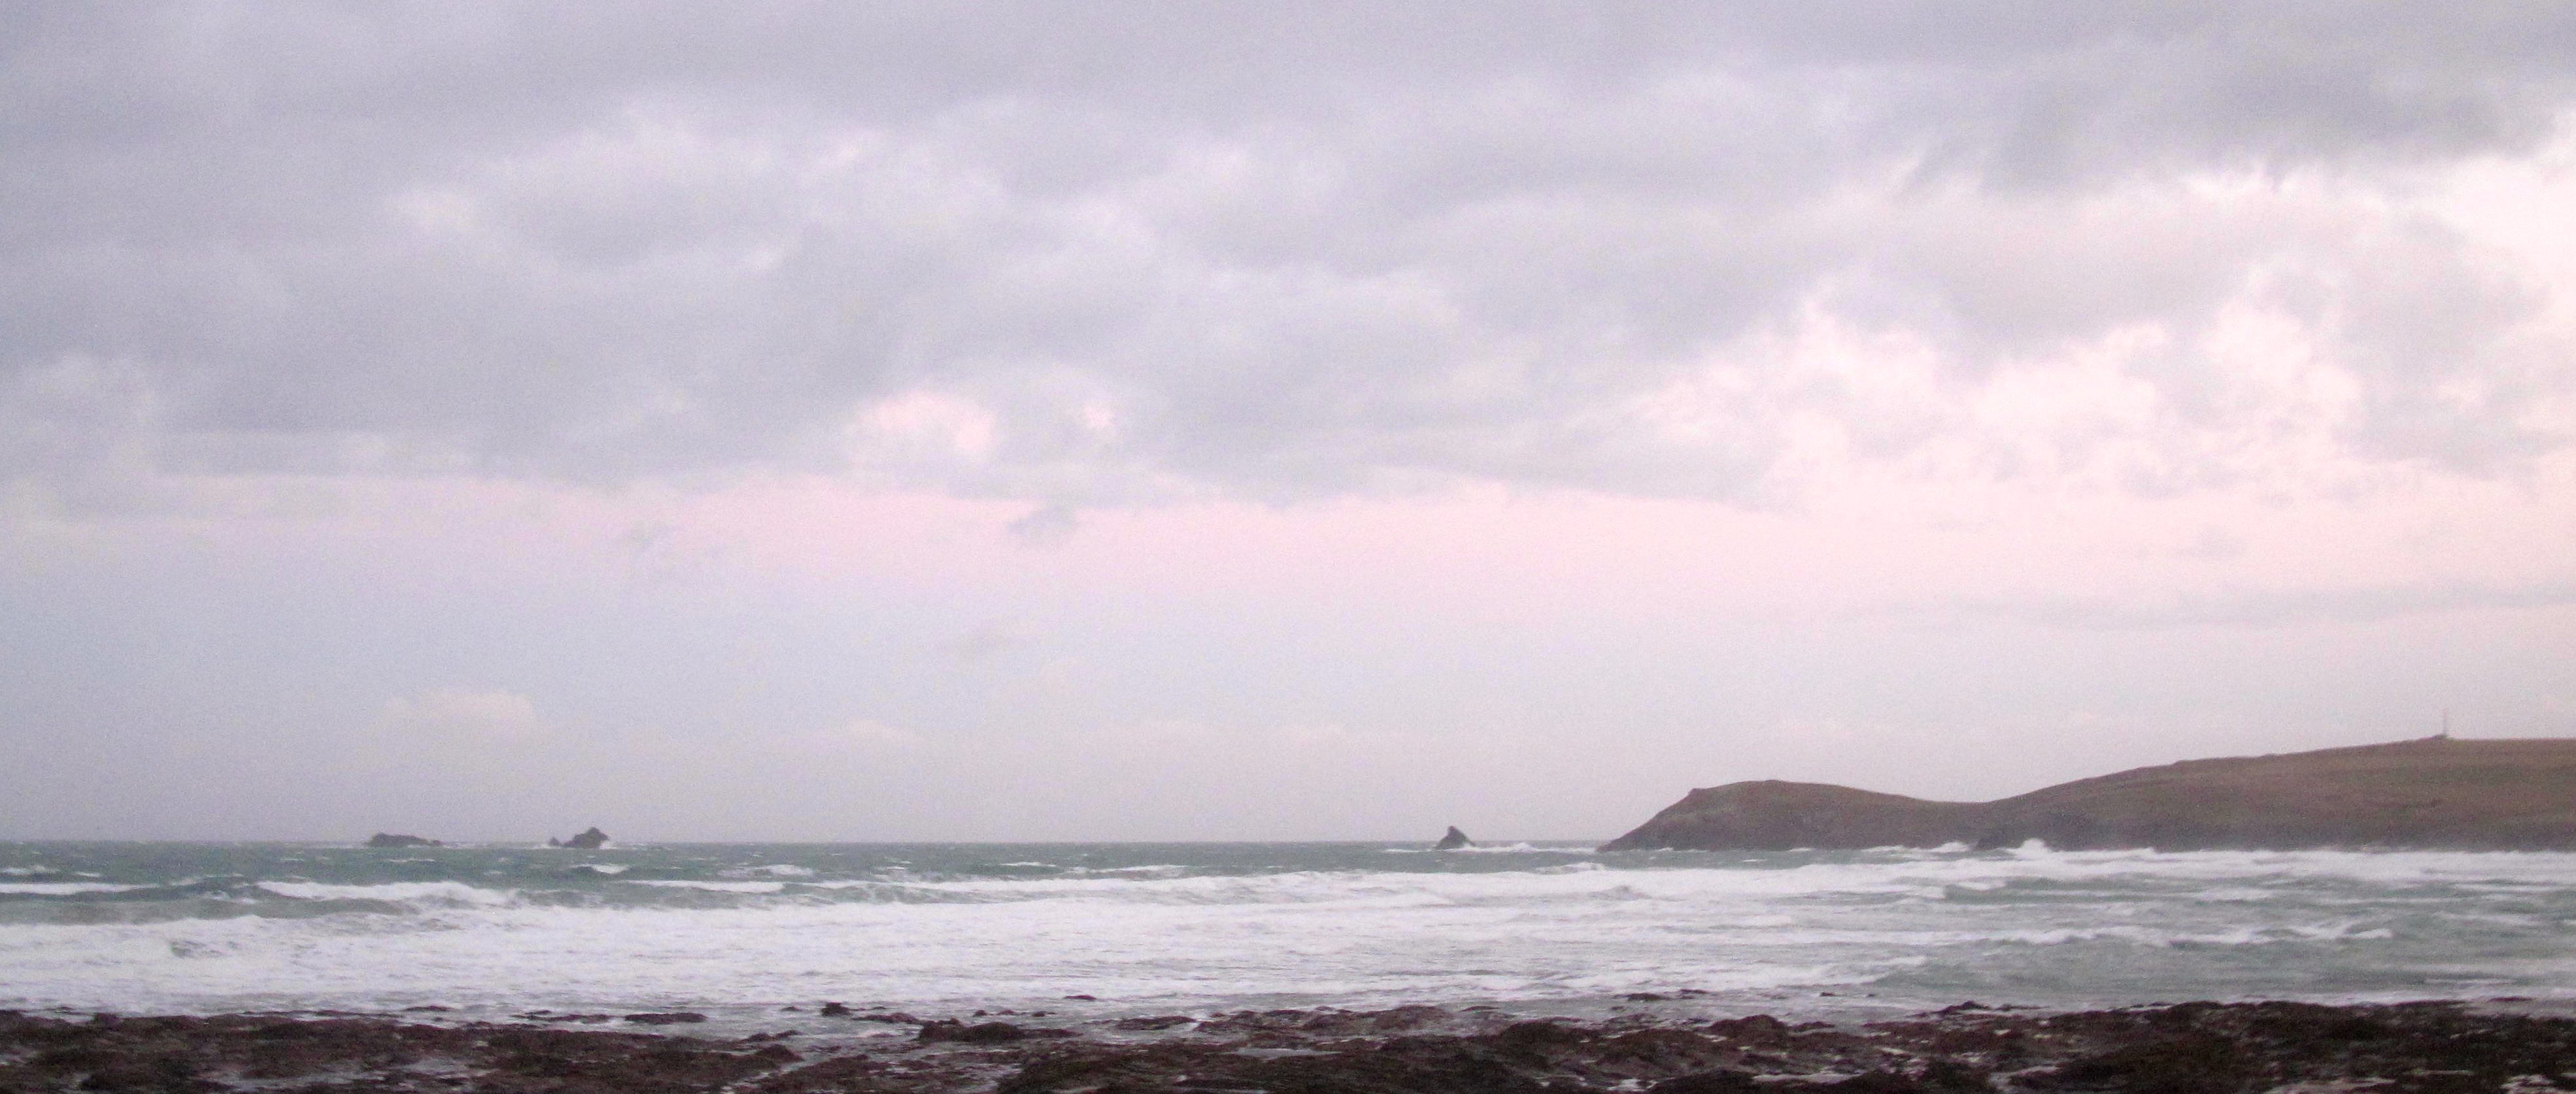 Surf Report for Tuesday 21st October 2014